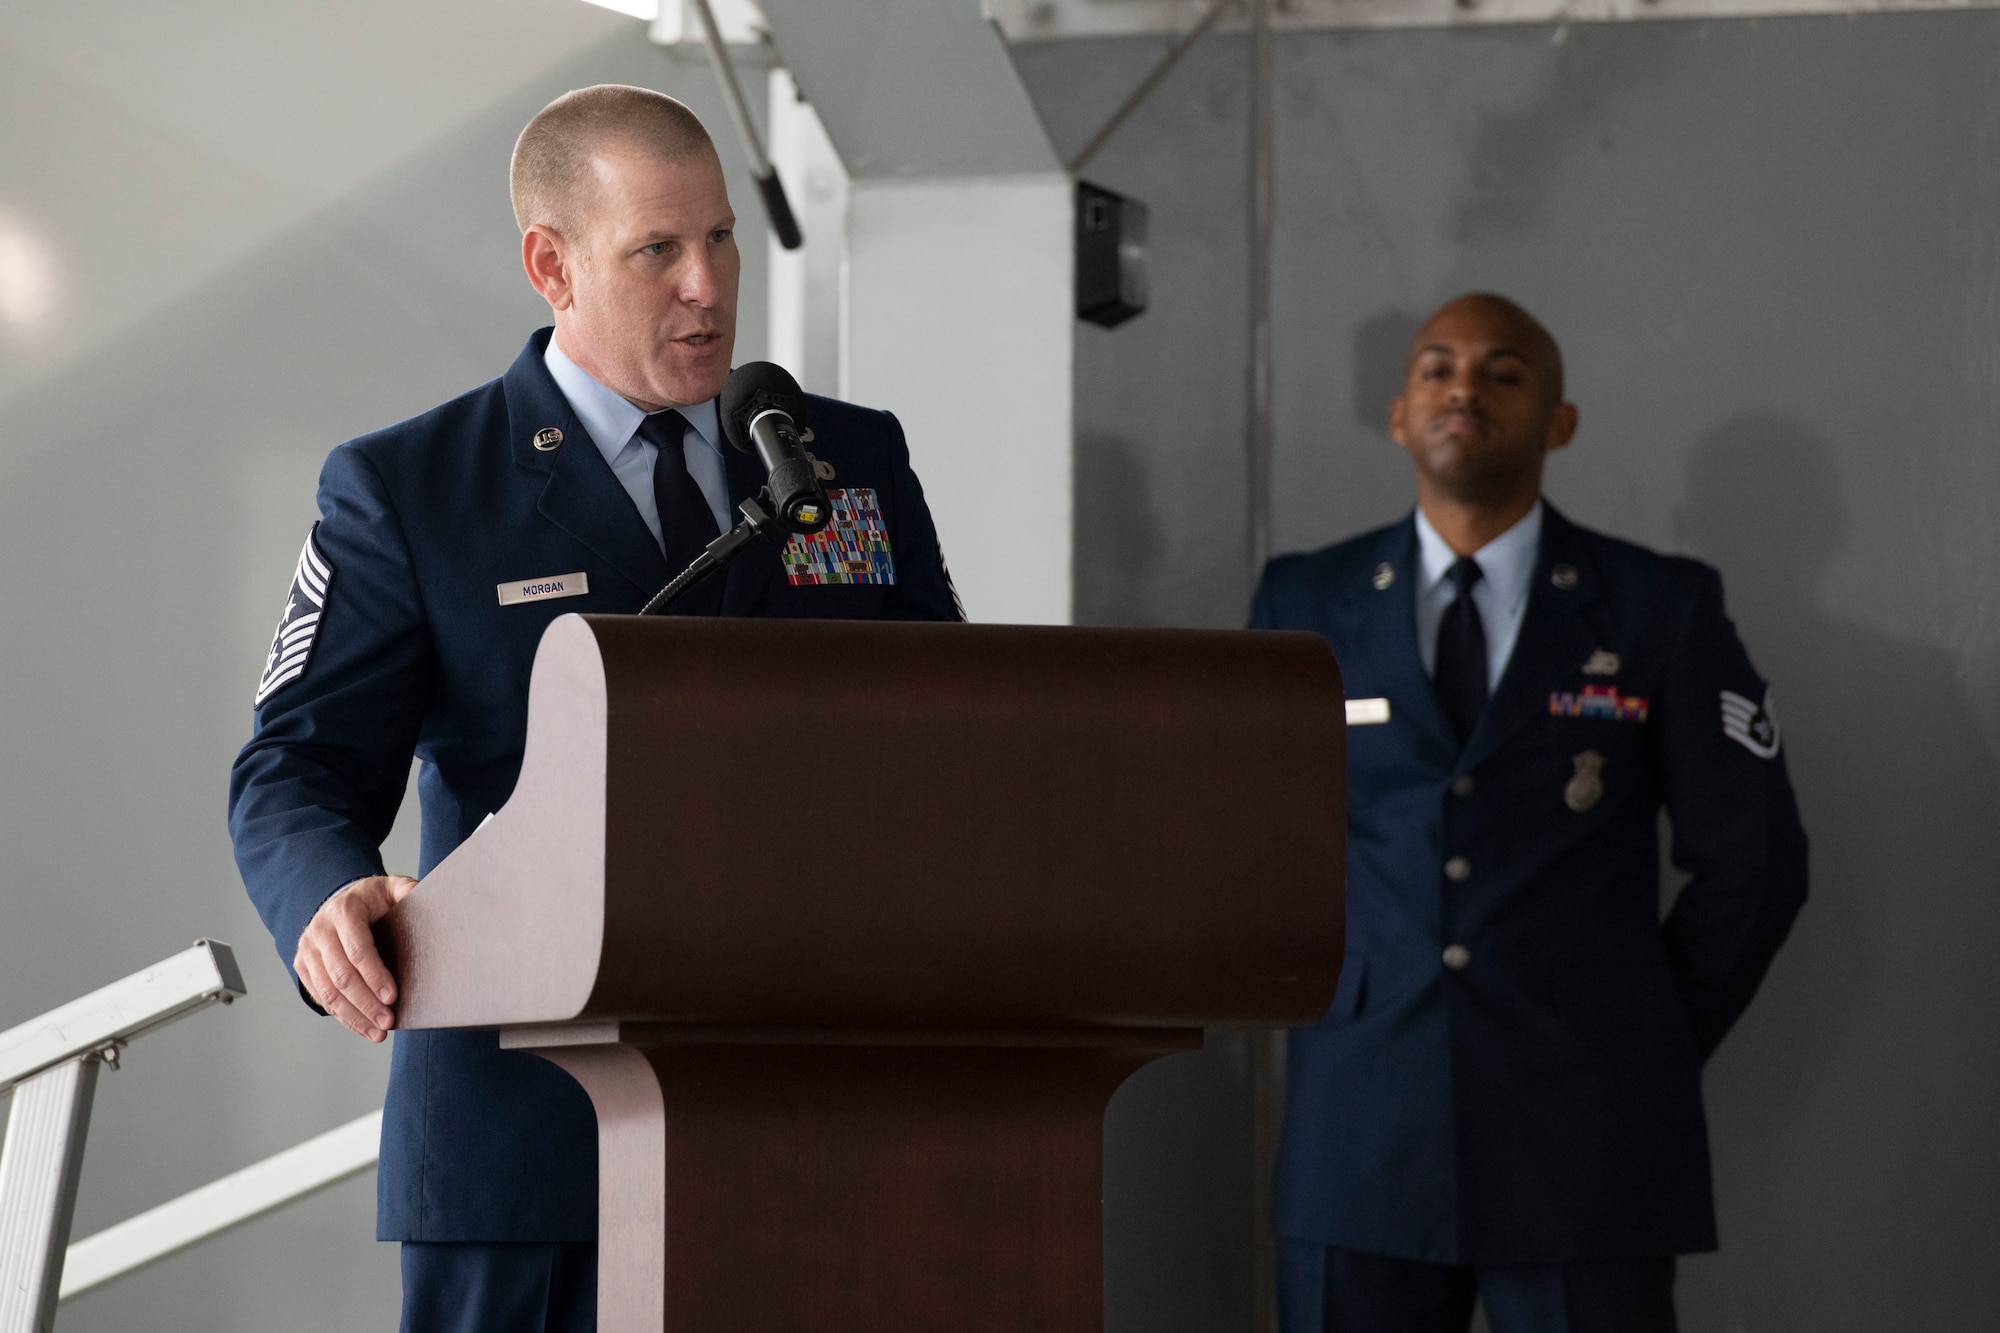 Chief Master Sgt. Michael Morgan, 42nd Air Base Wing command chief, speaks during Maxwell's Veteran's Day ceremony Nov. 11, 2020. The ceremony was presided over by Lt. Gen. James Hecker, Air University commander and president. (U.S. Air Force photo by Senior Airman Charles Welty)